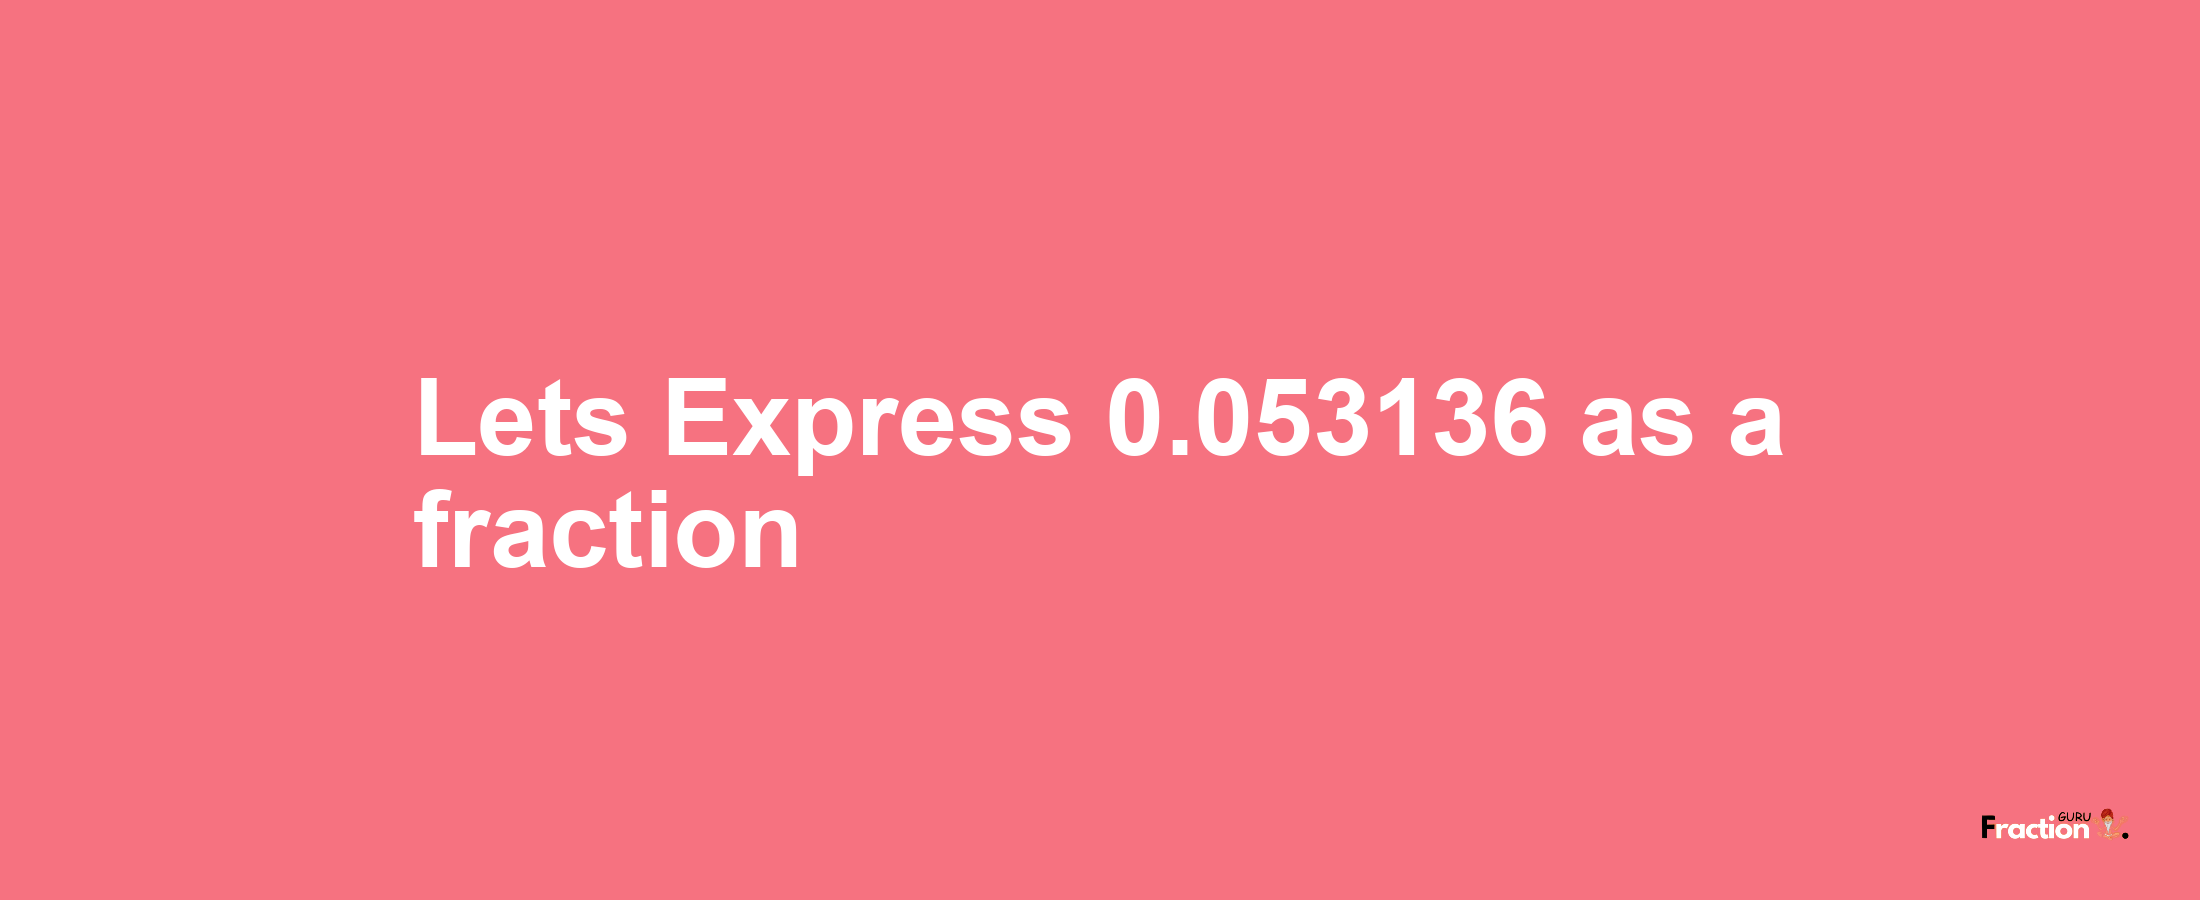 Lets Express 0.053136 as afraction